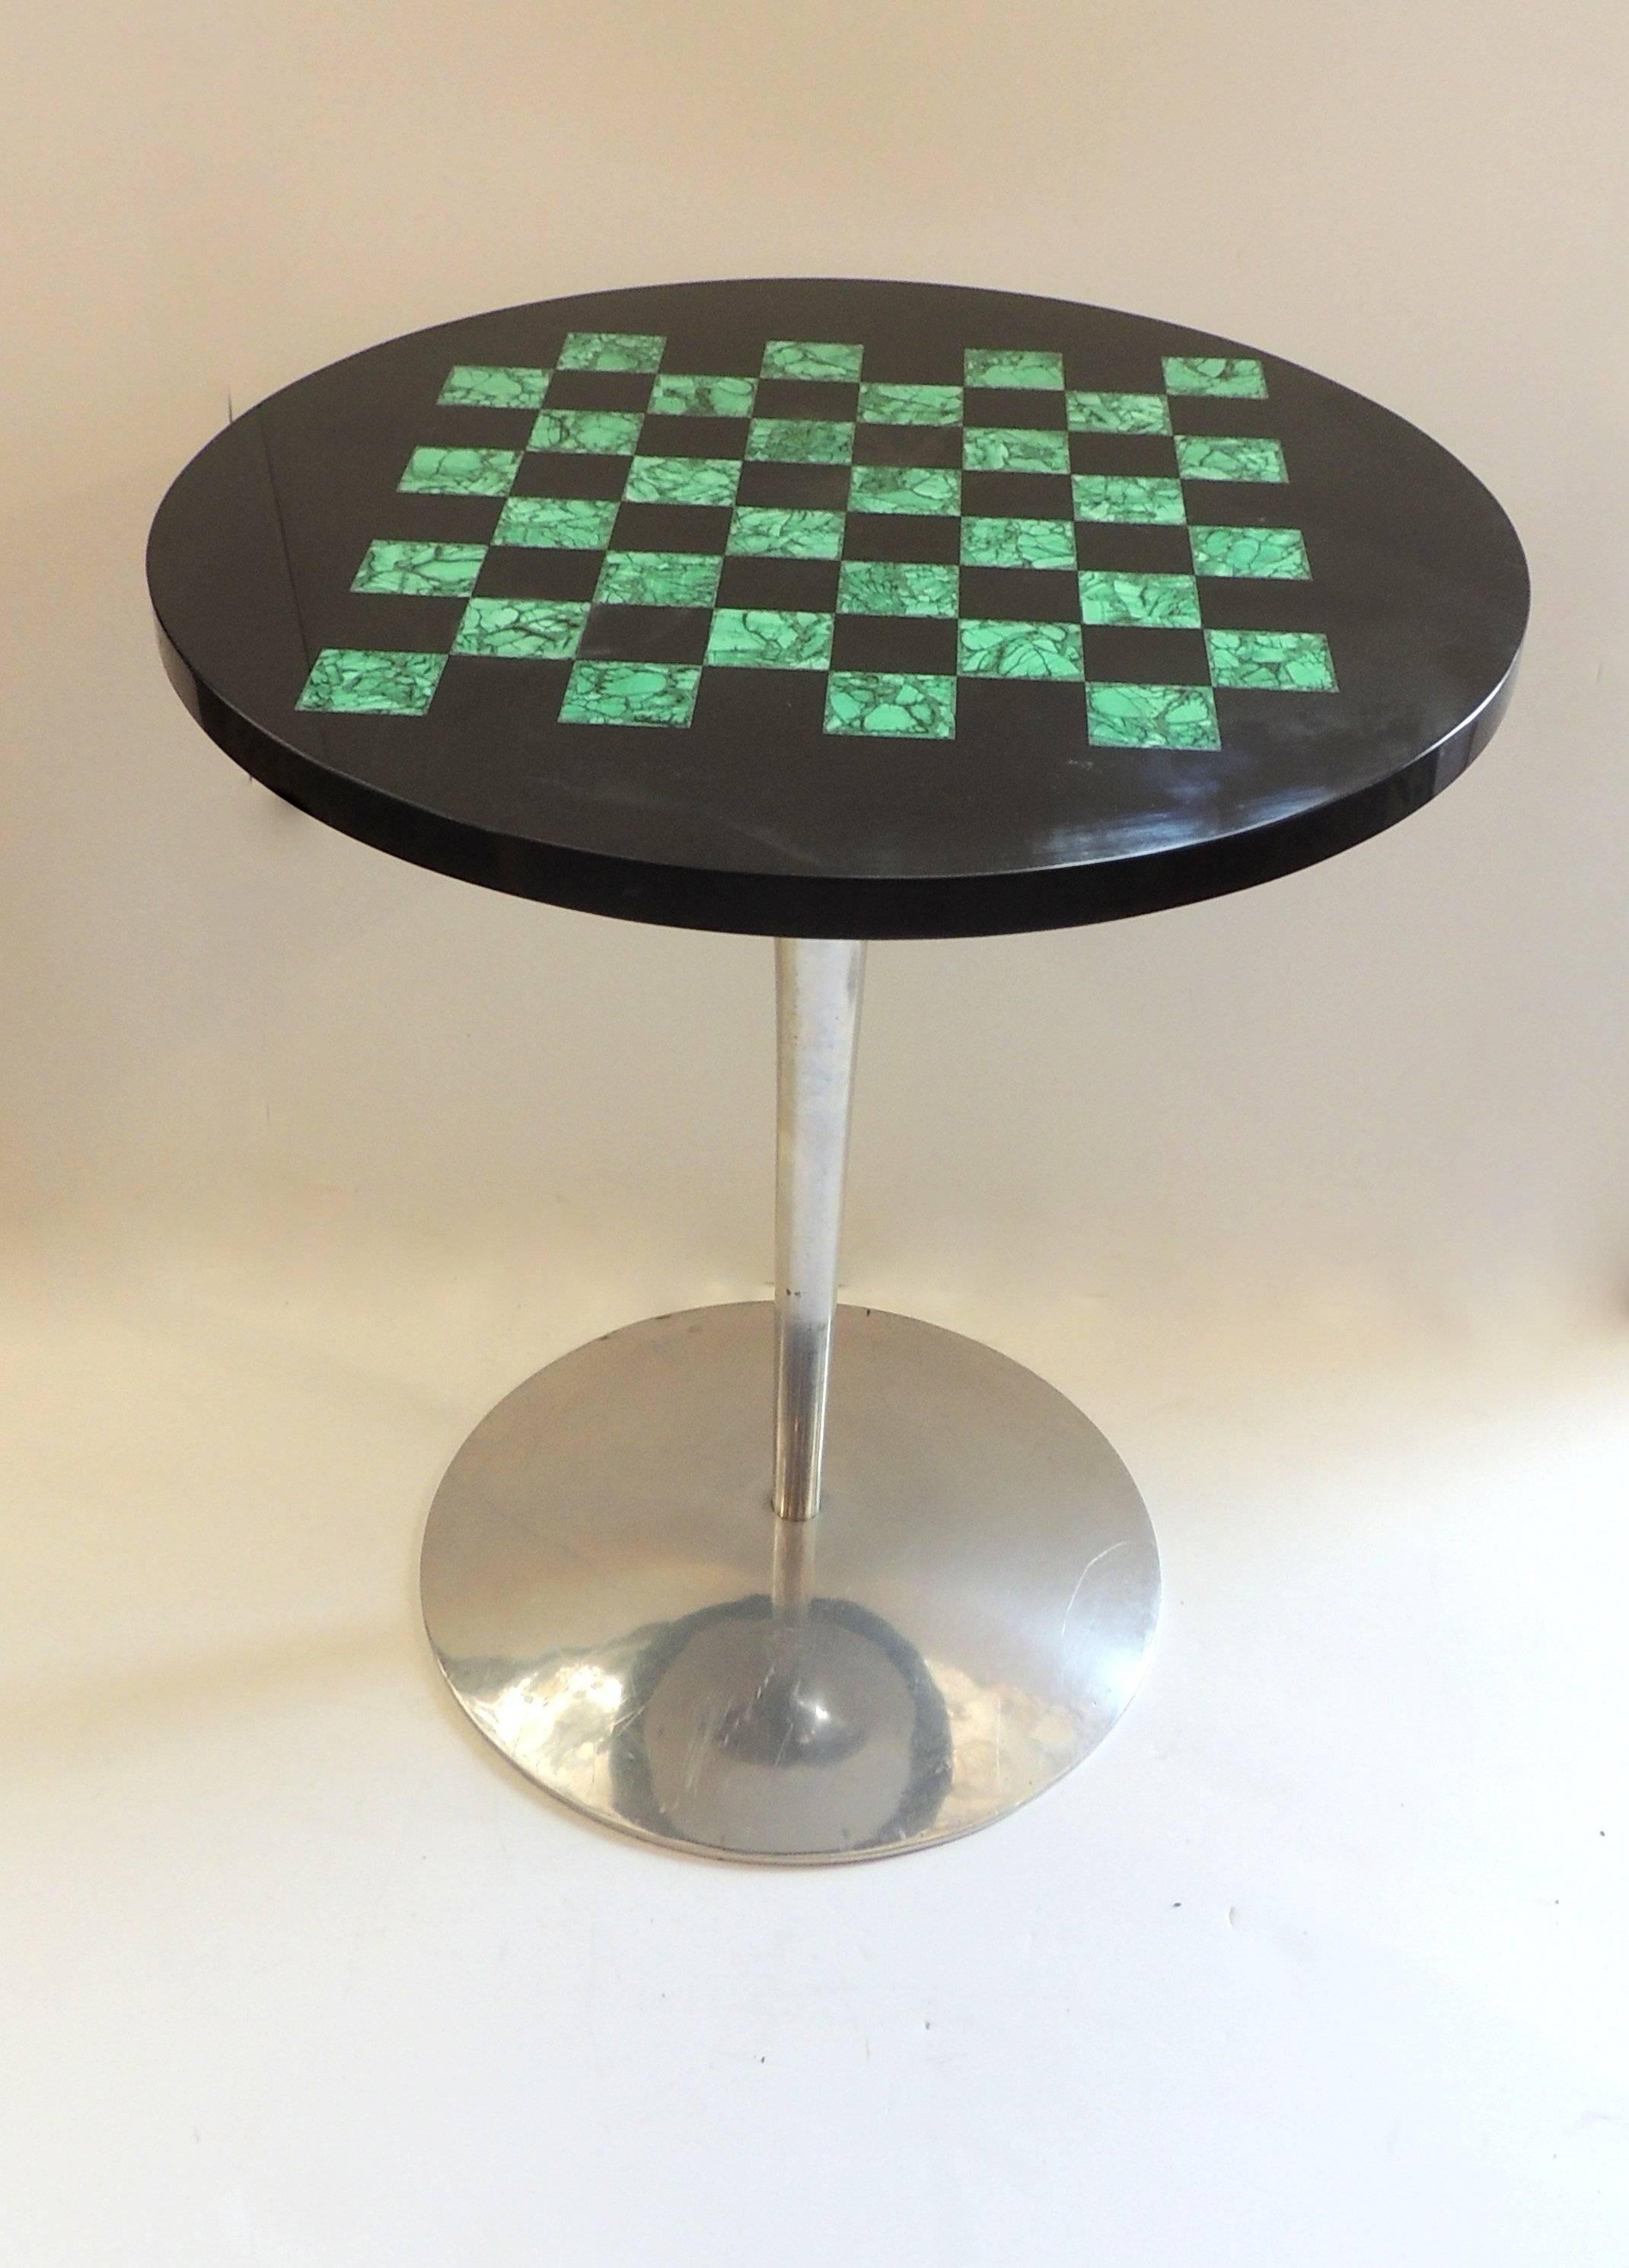 Erwin and Estelle Laverne nickel side table with black marble and malachite checker board top perfect for the transitional or modern room that calls for a little accent.

Measures: 18